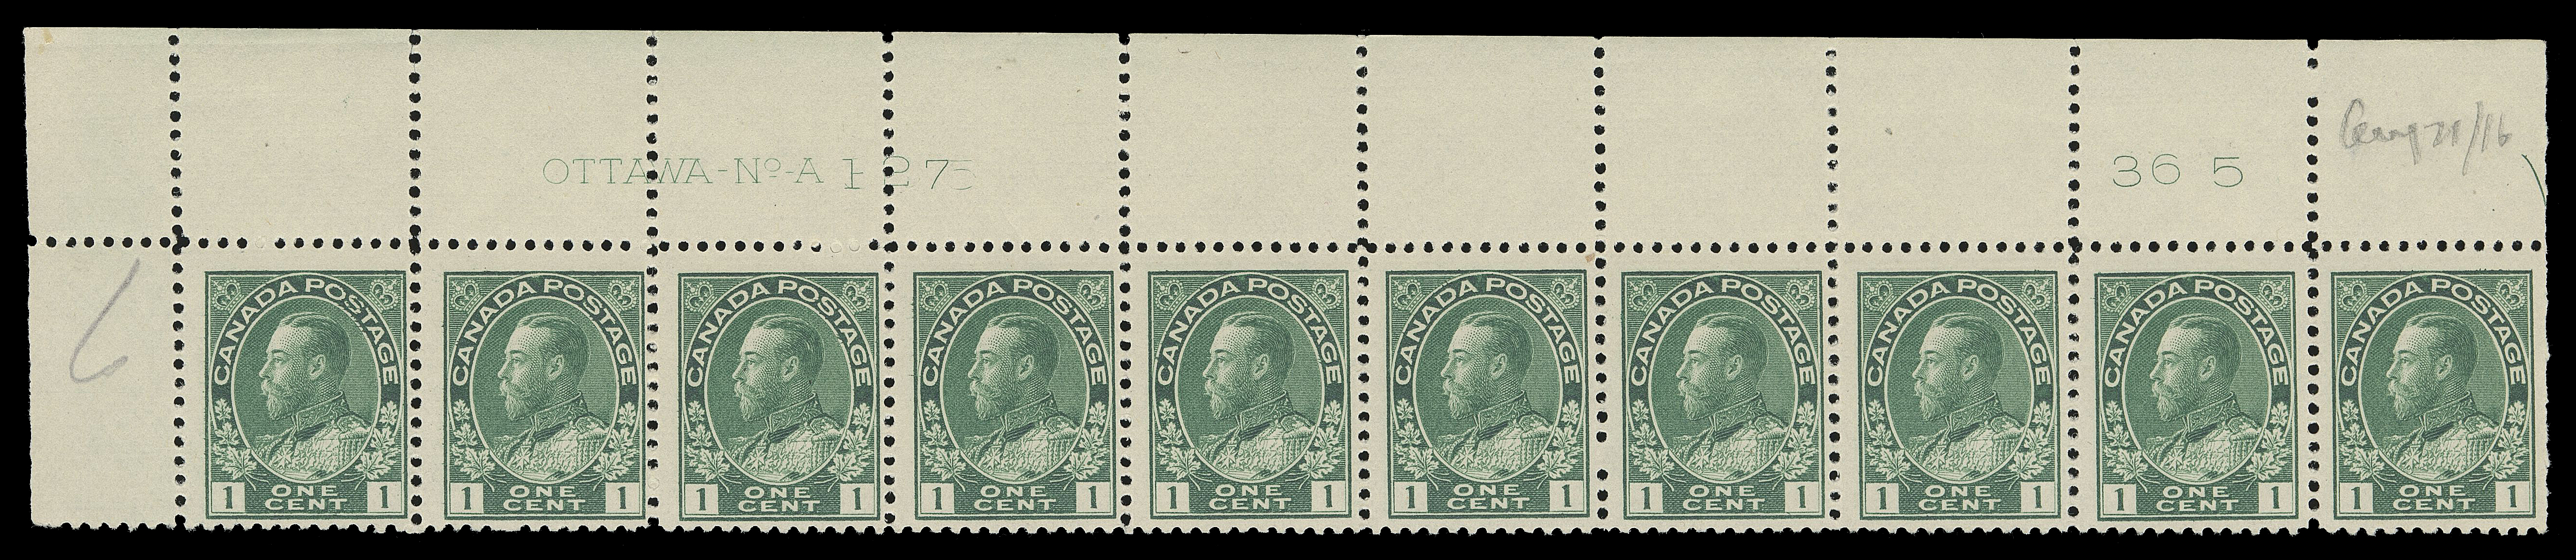 ADMIRAL STAMPS  104e,Four fresh mint strips of ten with consecutive plate numbers - UL Plate 127, UL Plate 128, UR Plate 129, UL Plate 130; reasonably to well centered. All hinged in selvedge only leaving all stamps NH, F-VF (Unitrade cat. $3,800)